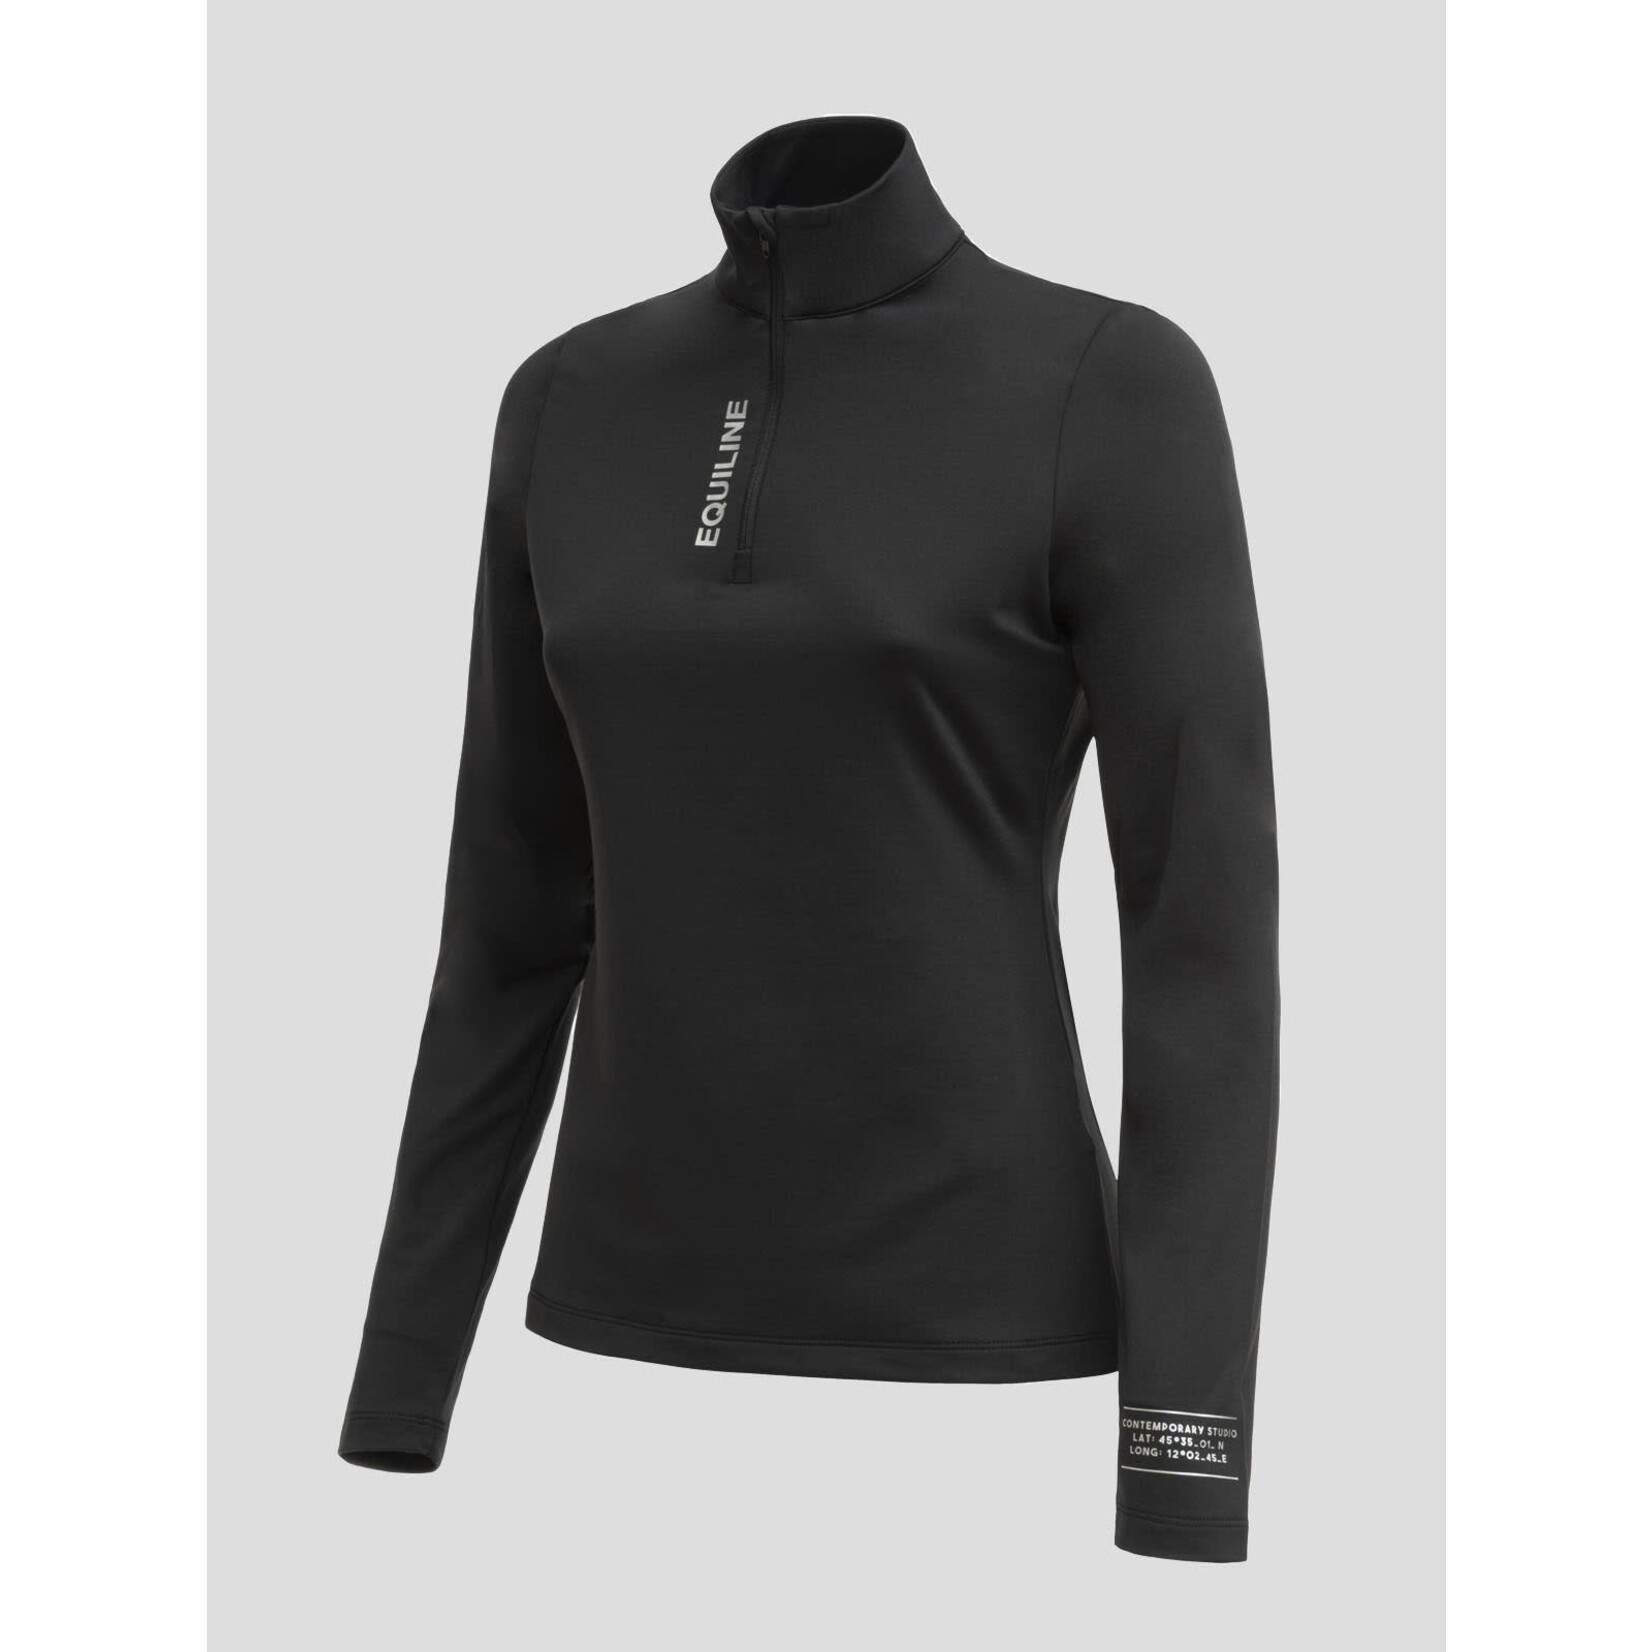 Equiline Equiline Canic Women's 1/2 zip second skin shirt